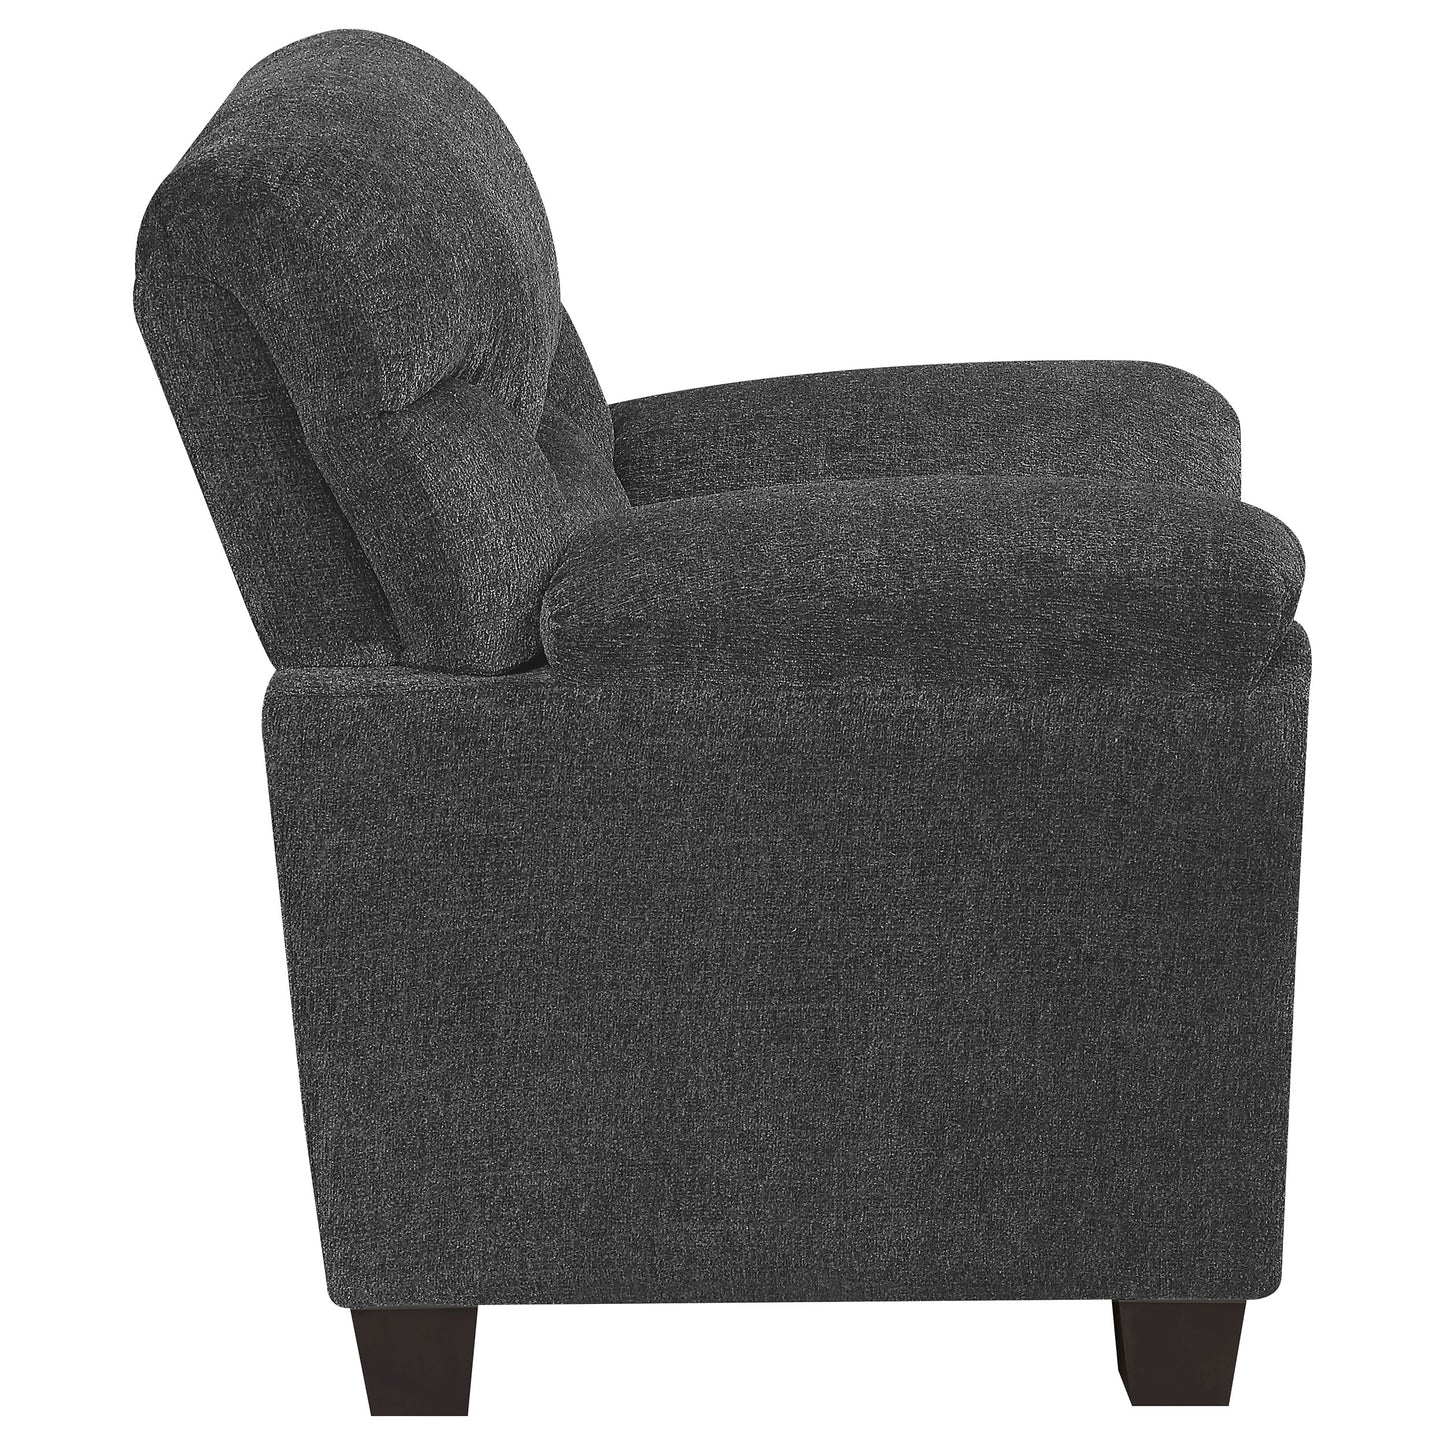 Clementine Upholstered Chair with Nailhead Trim Grey